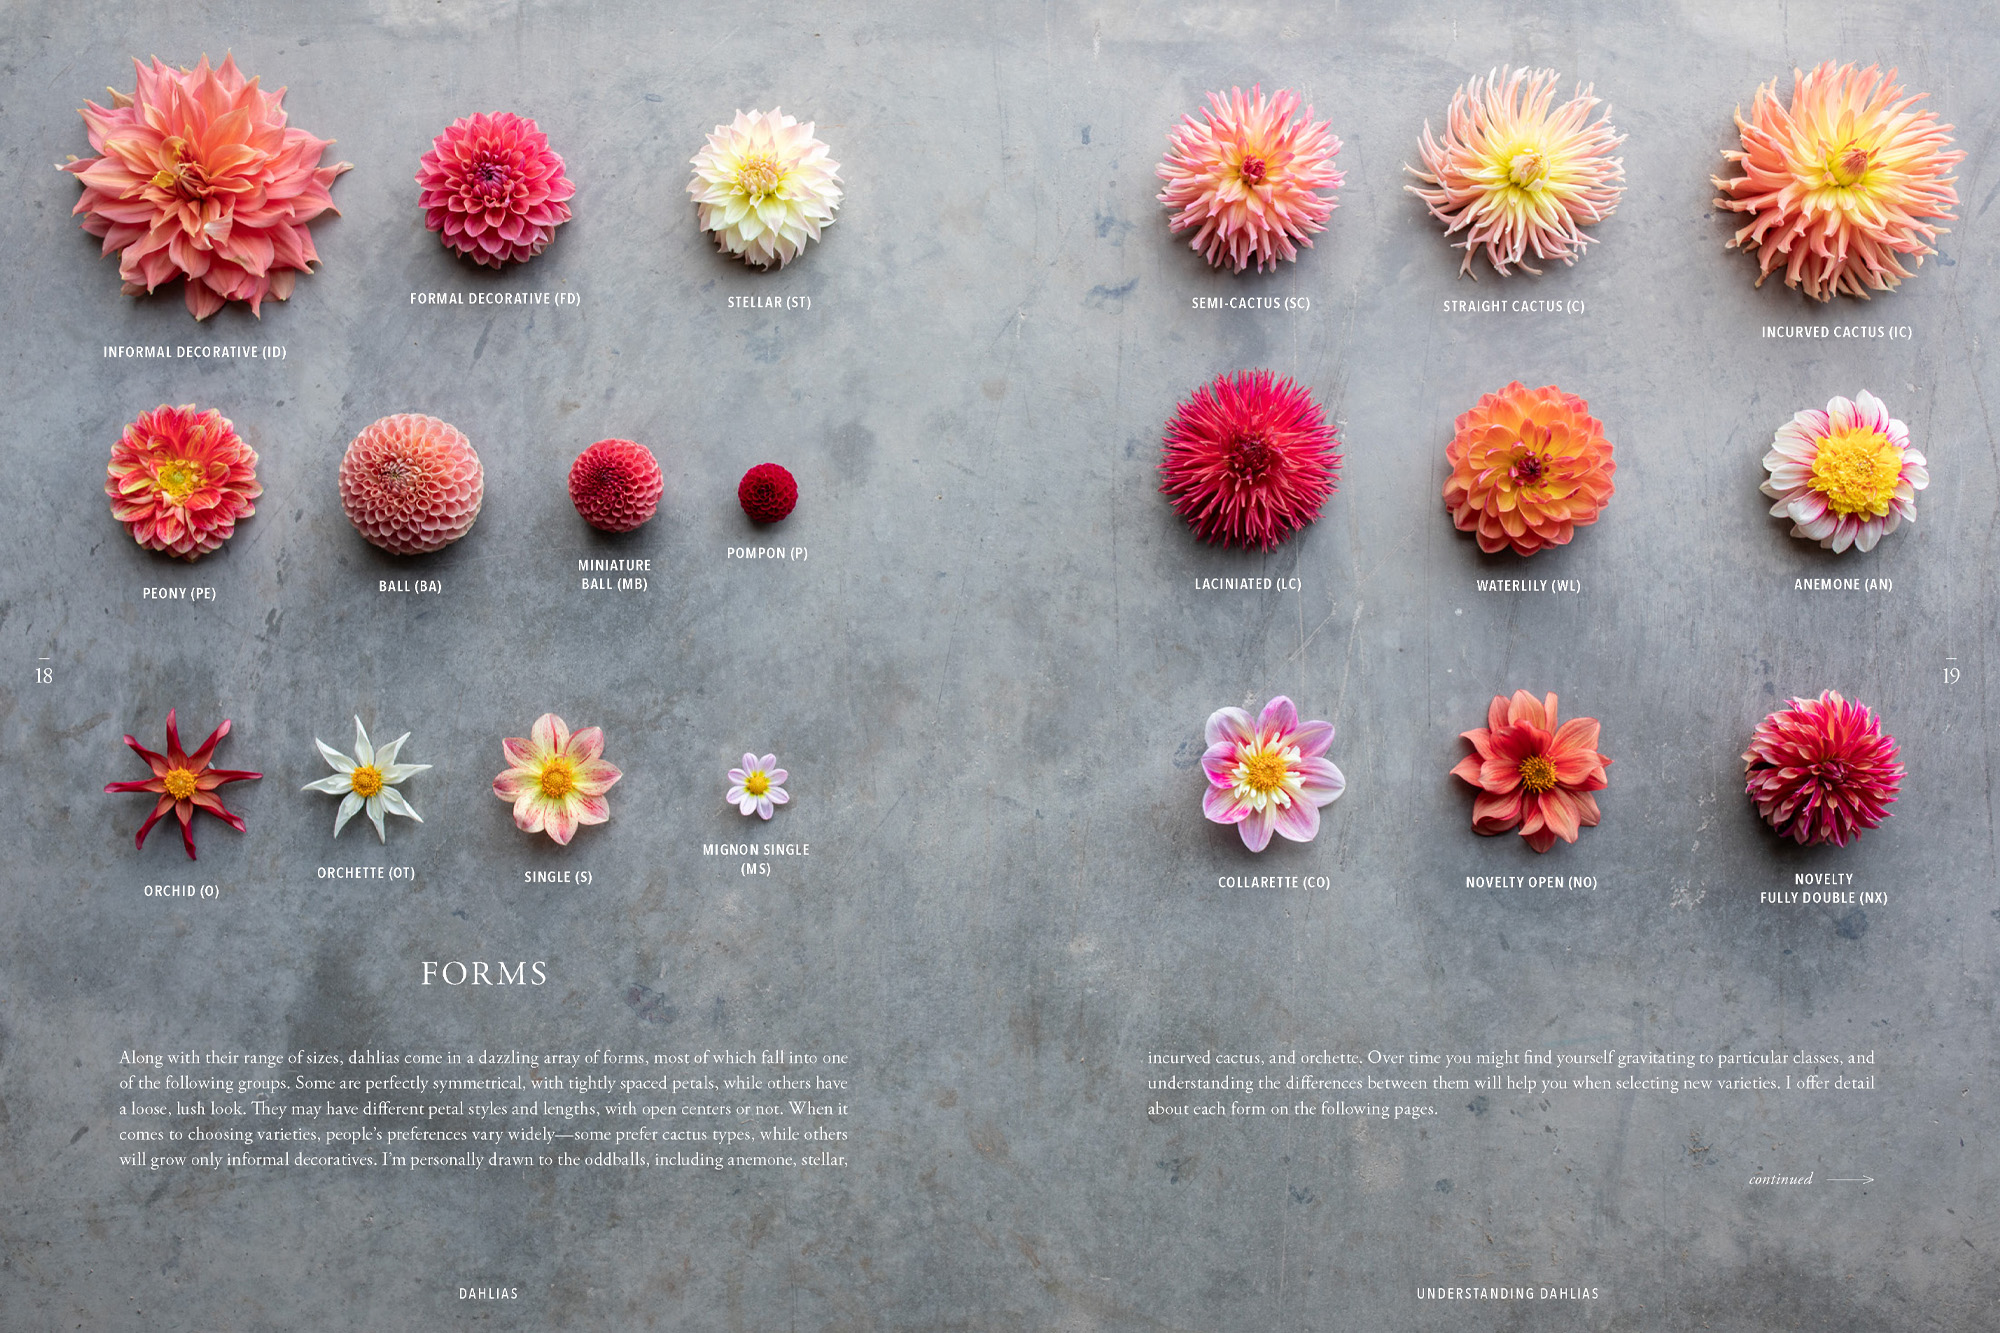 A page from Floret Farm's Discovering Dahlias